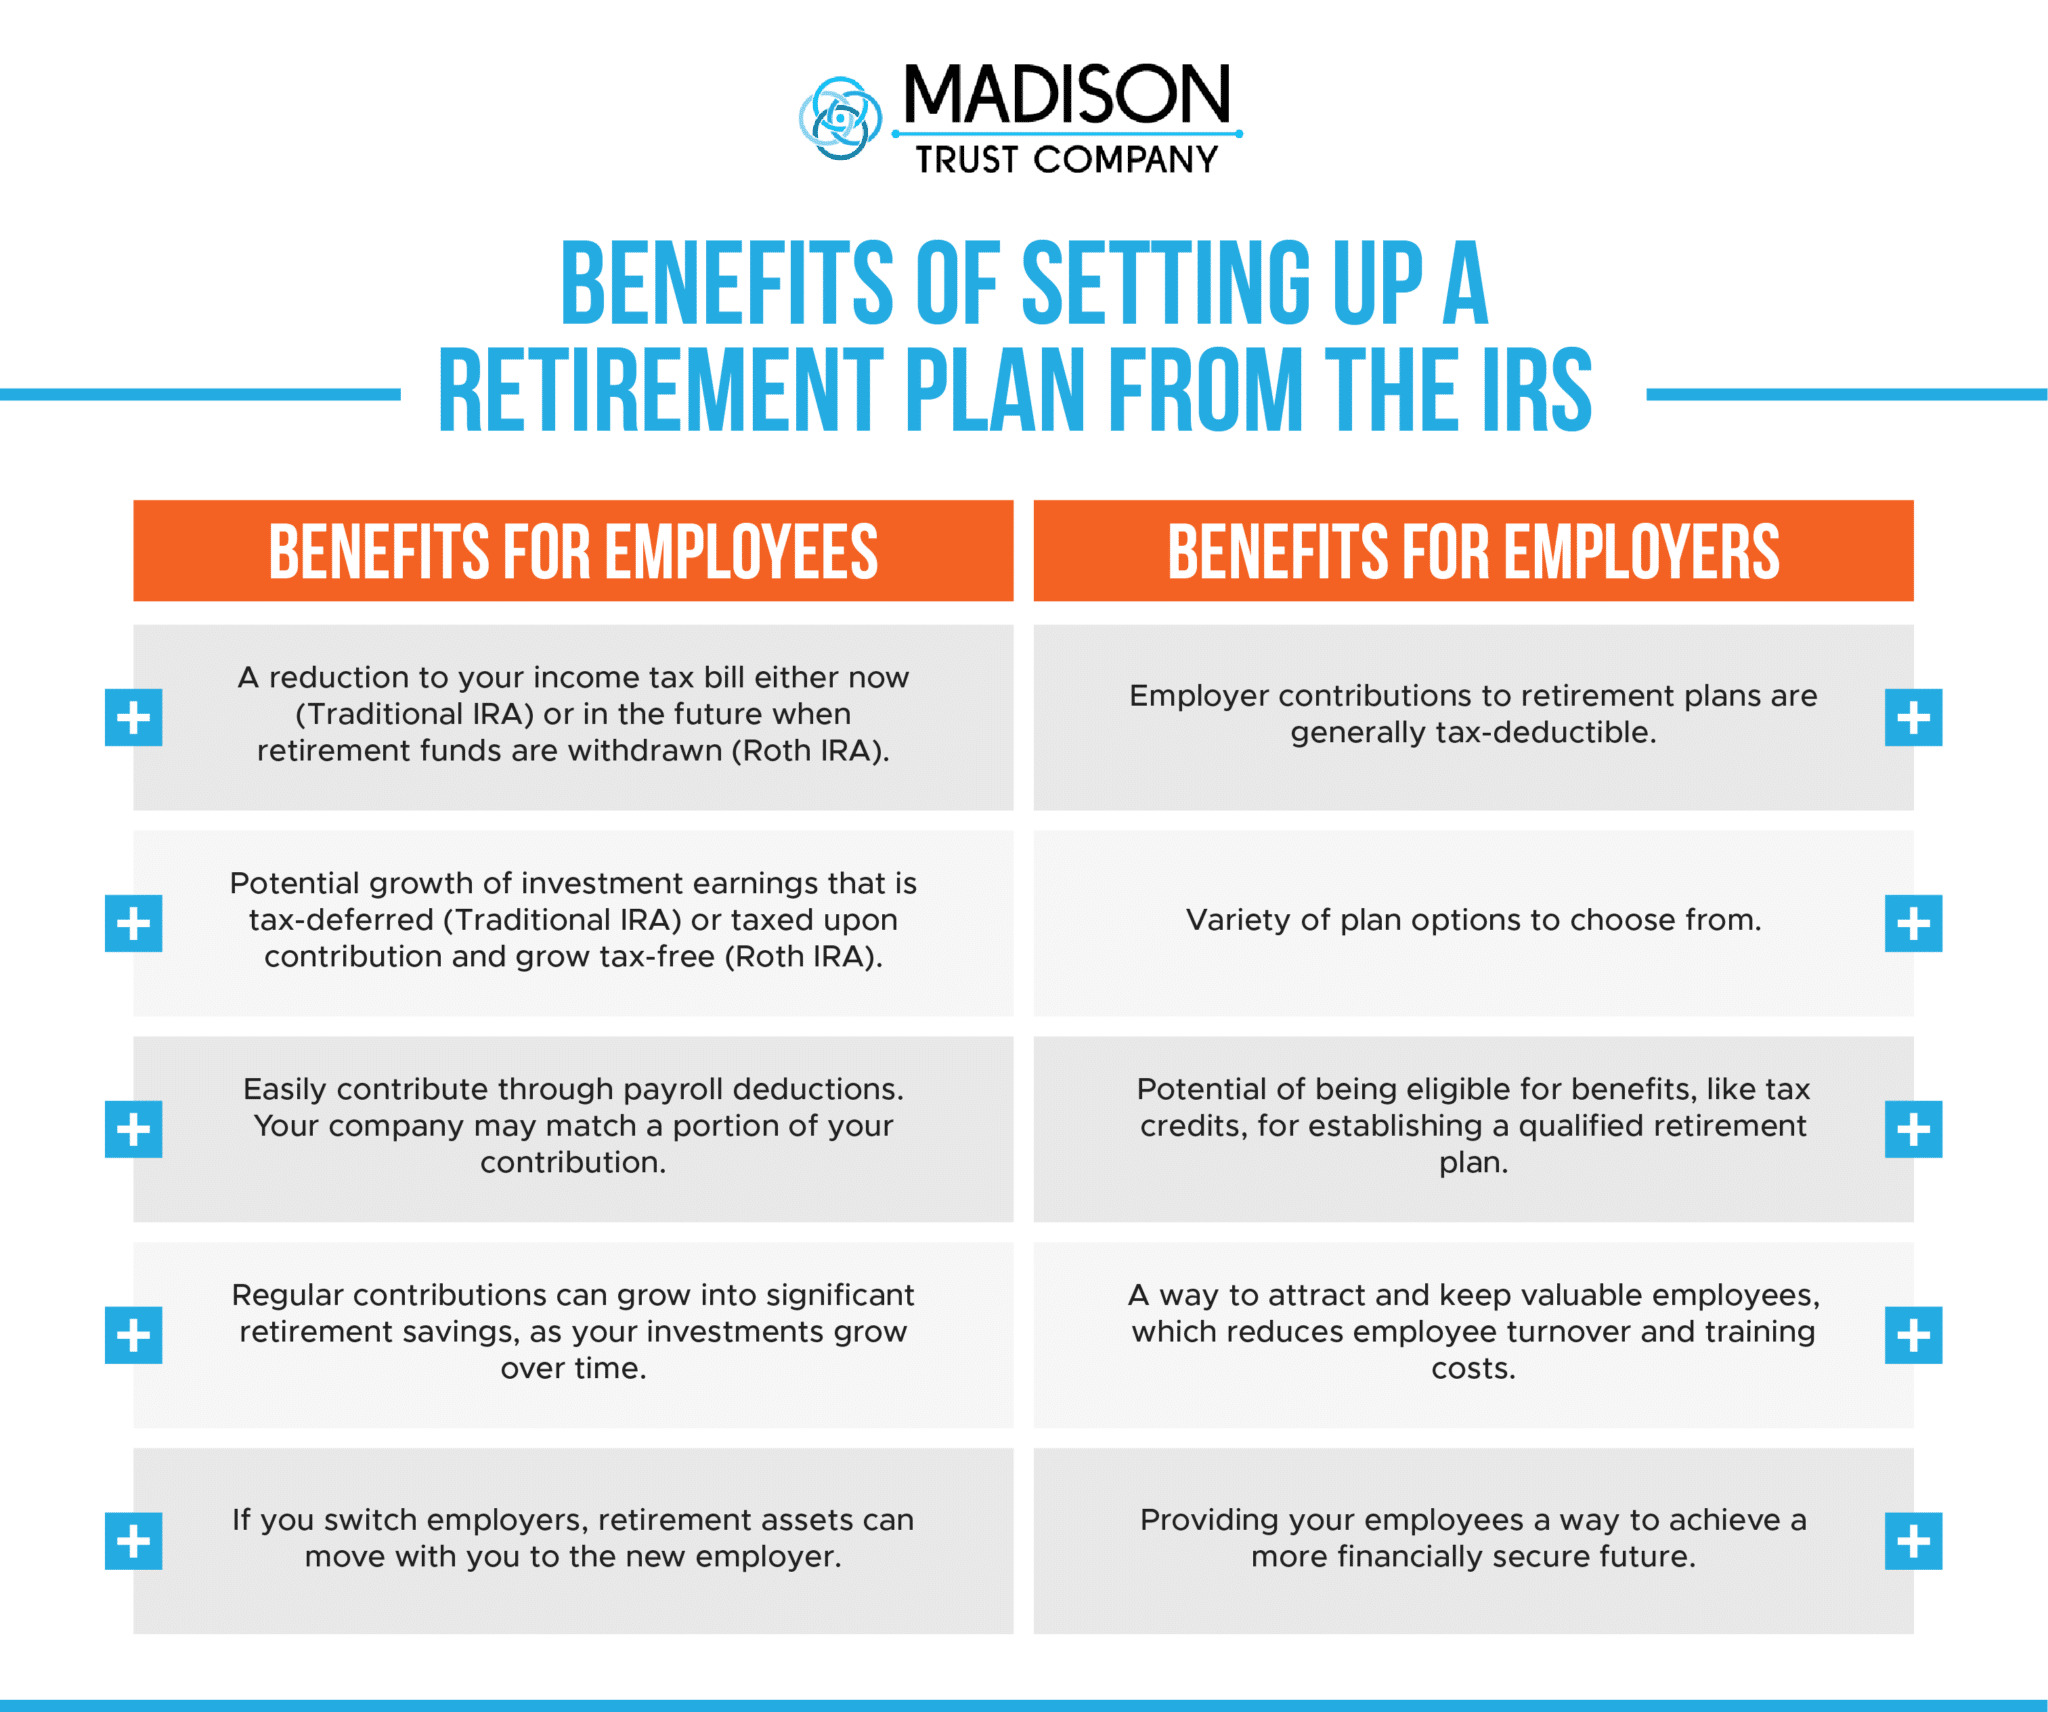 Benefits of Setting Up a Retirement Saving Plan for Employees from the IRS include: (1) a reduction to your income tax bill (2) potential growth of investment earnings that is tax-deferred or taxed upon contribution and grow tax-free (3) easily contribute through payroll deductions. (4) regular contributions can grow into significant retirement savings, as your investments grow over time. (5) if you switch employers, retirement assets can move with you to the new employer